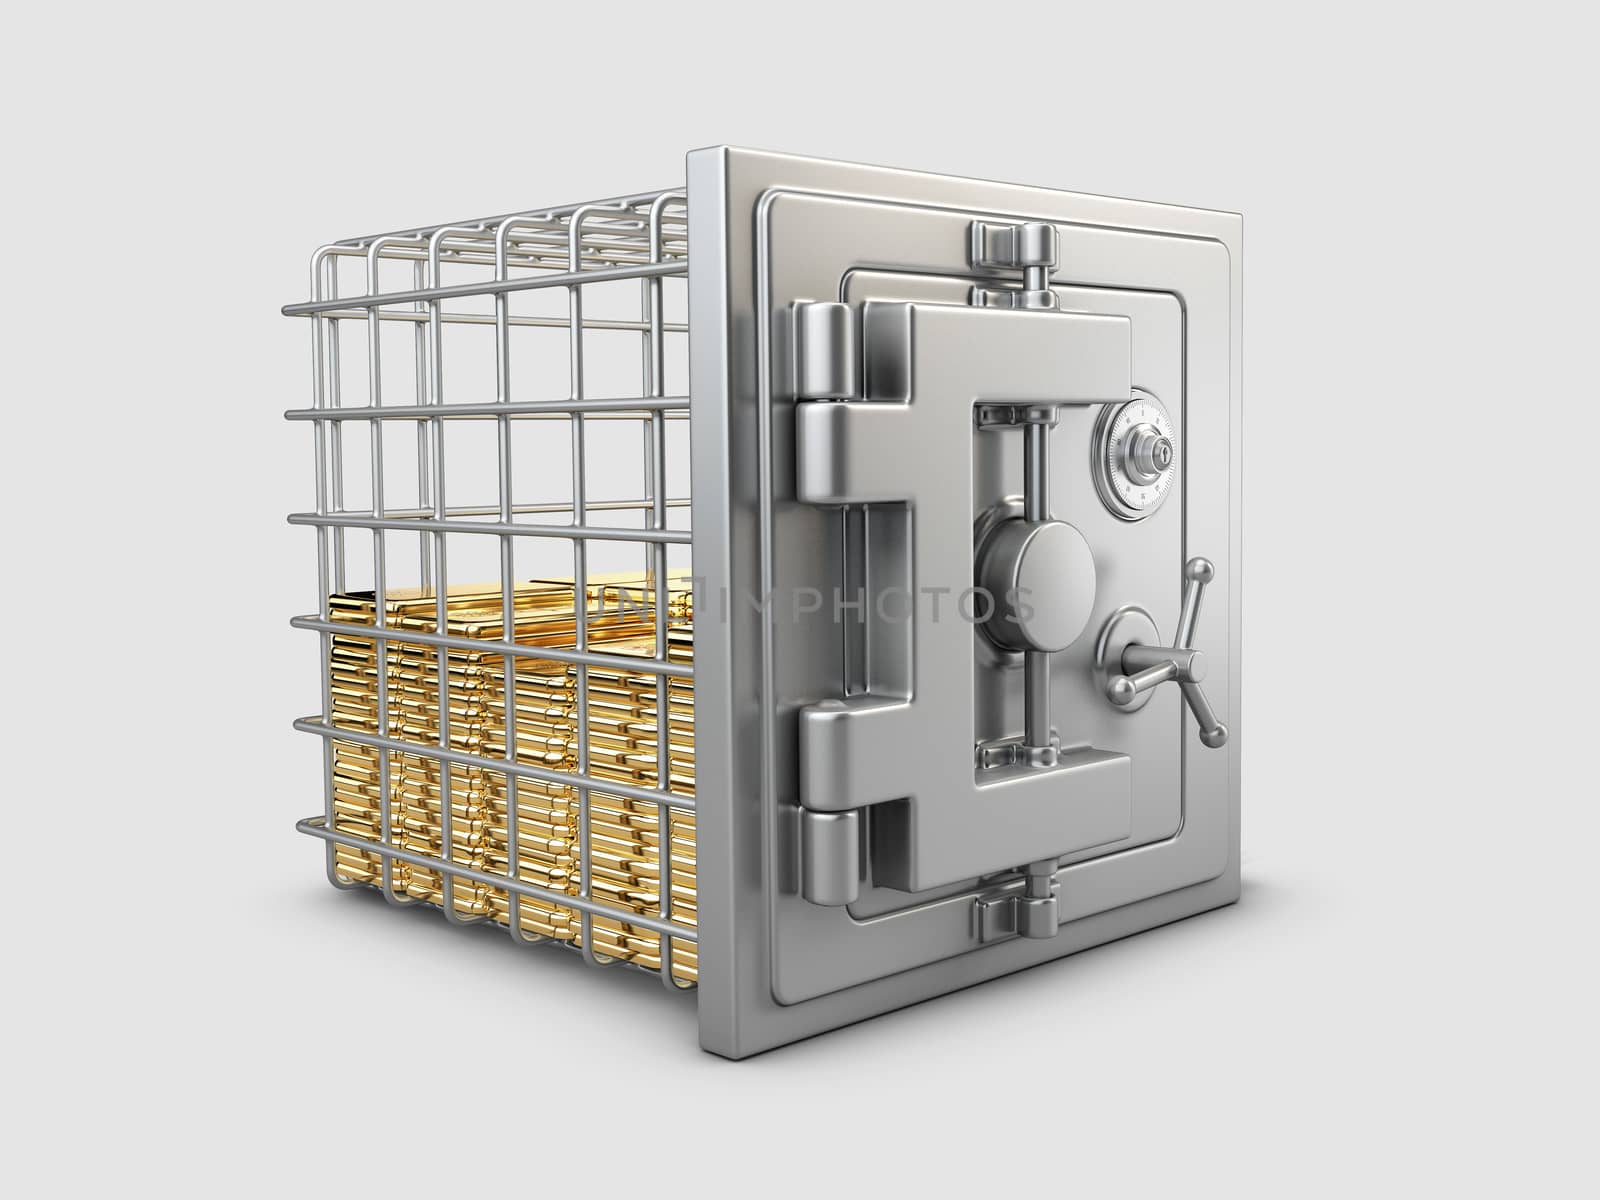 3d Rendering of Security metal safe with gold bars inside, clipping path include.